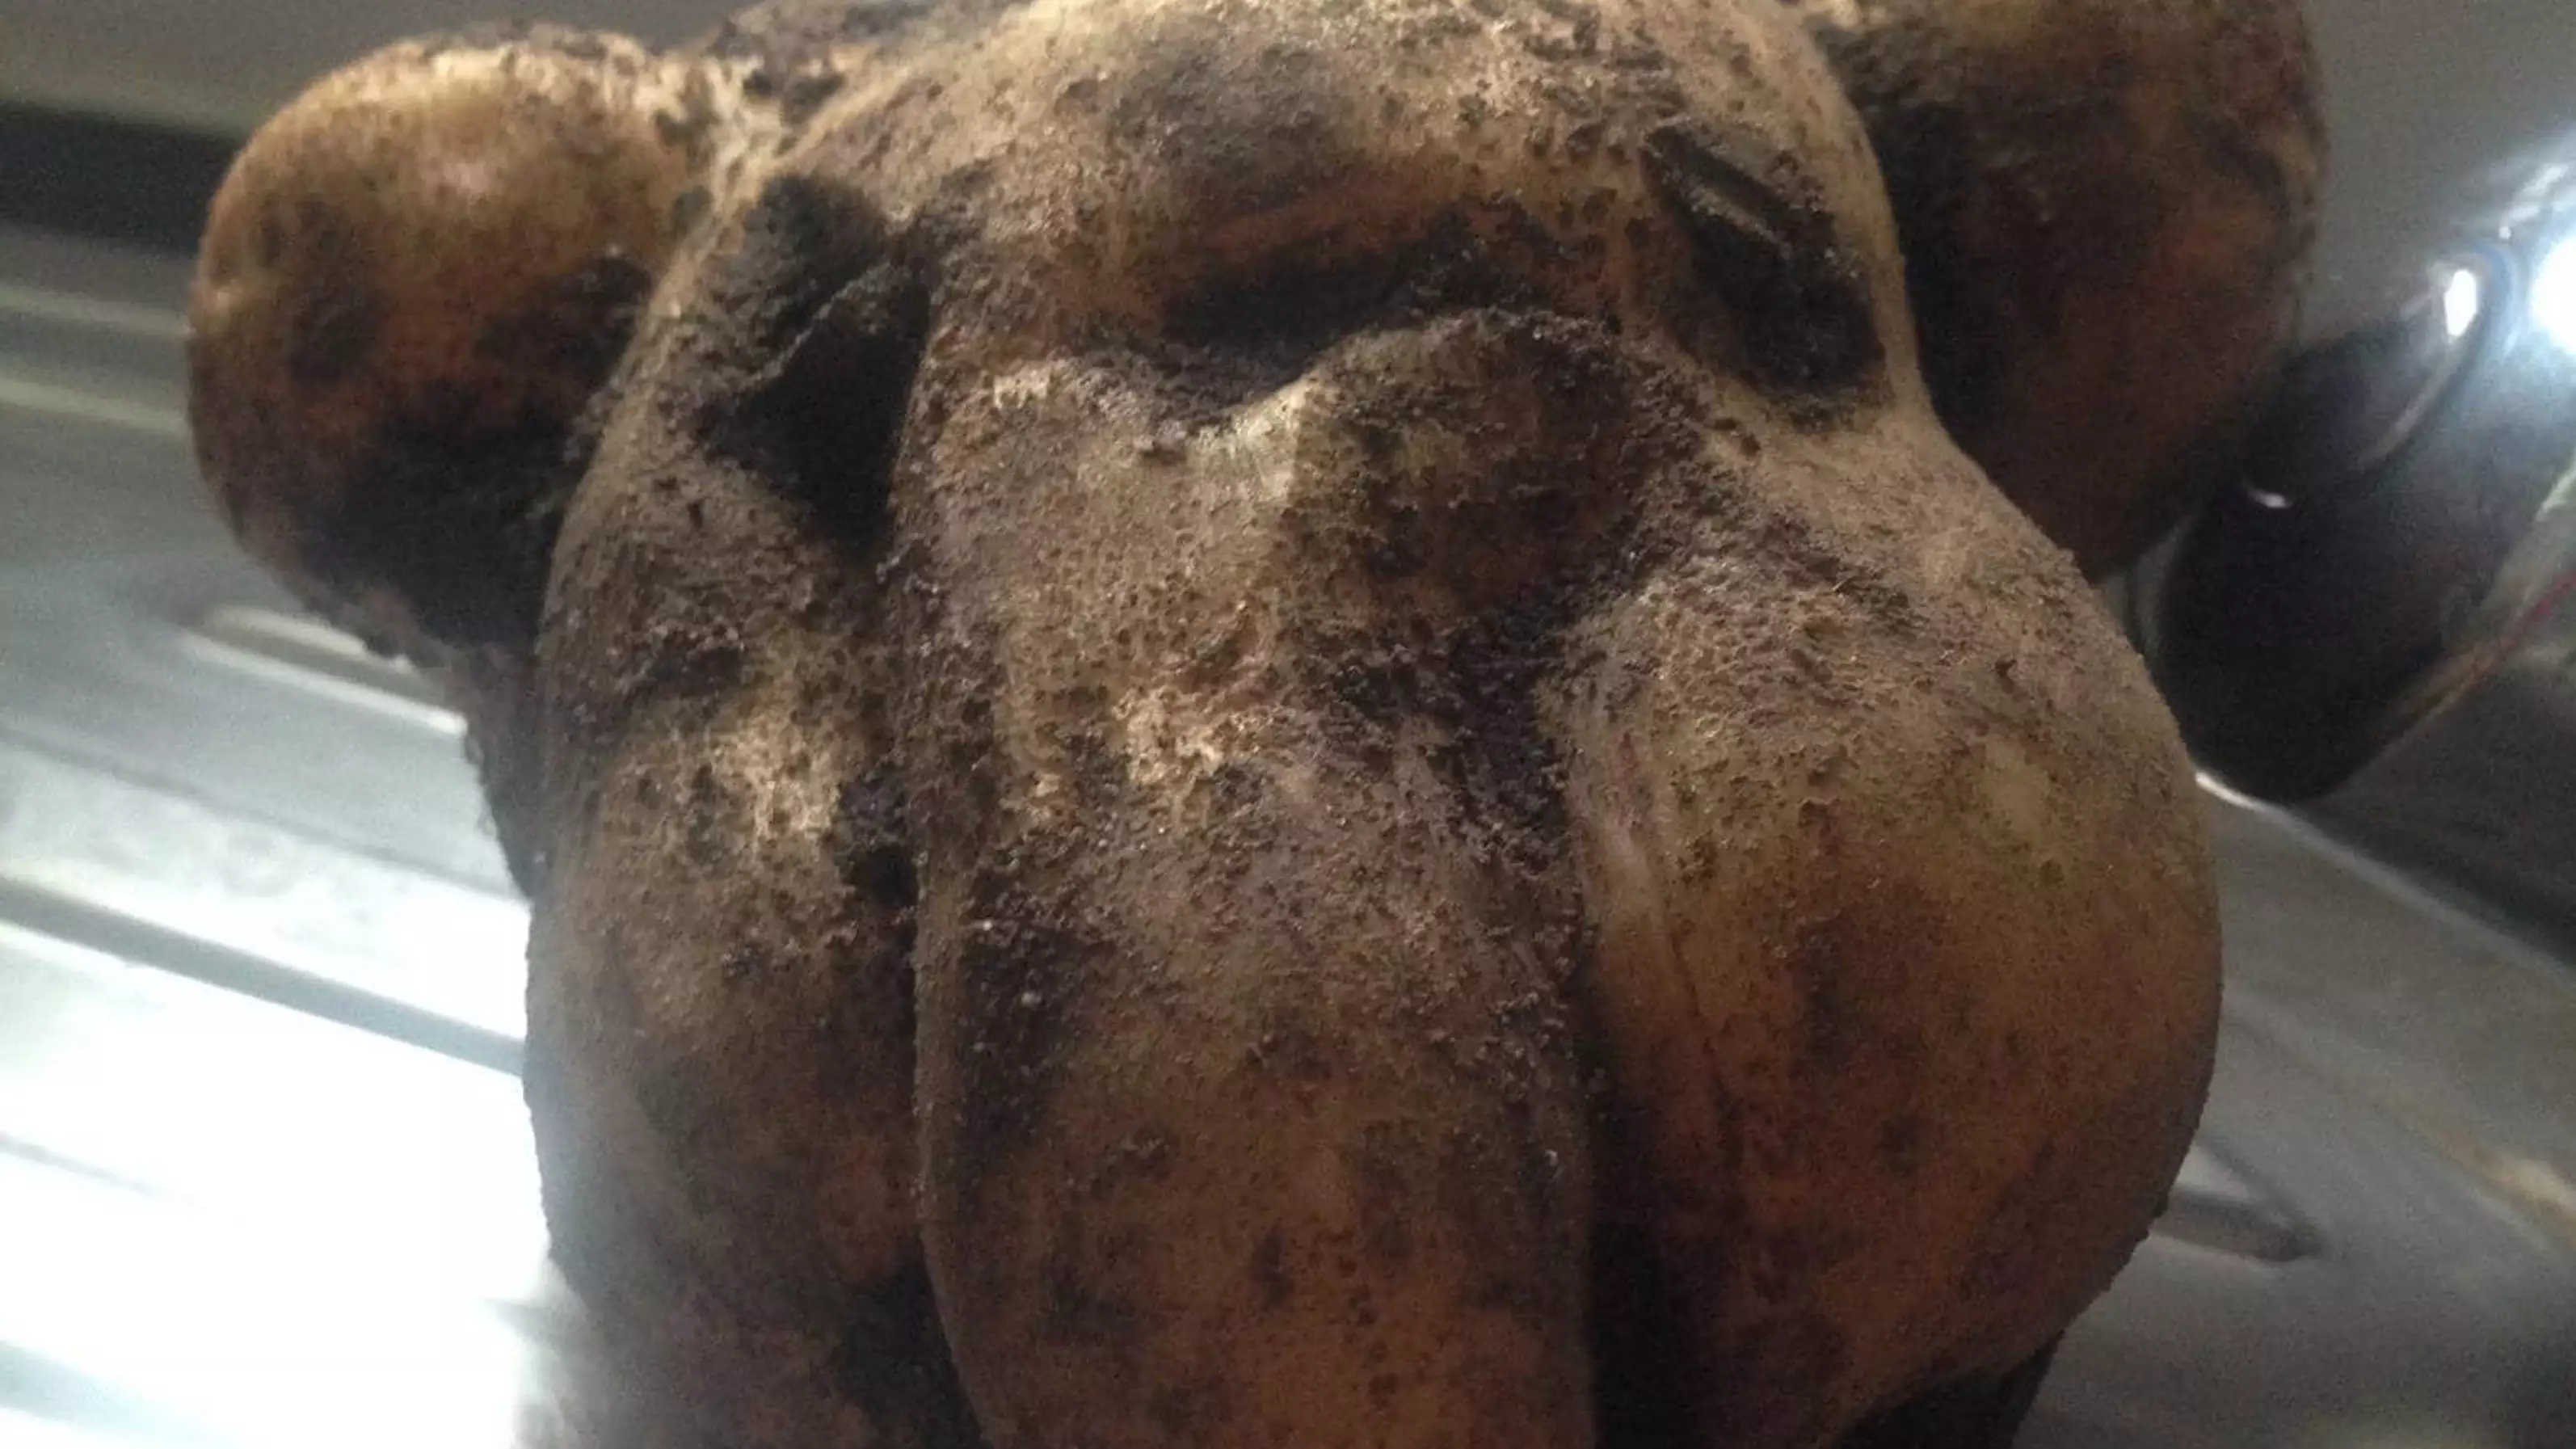 Pet Owner Digs Up Potato That Looks Exactly Like Her Dog